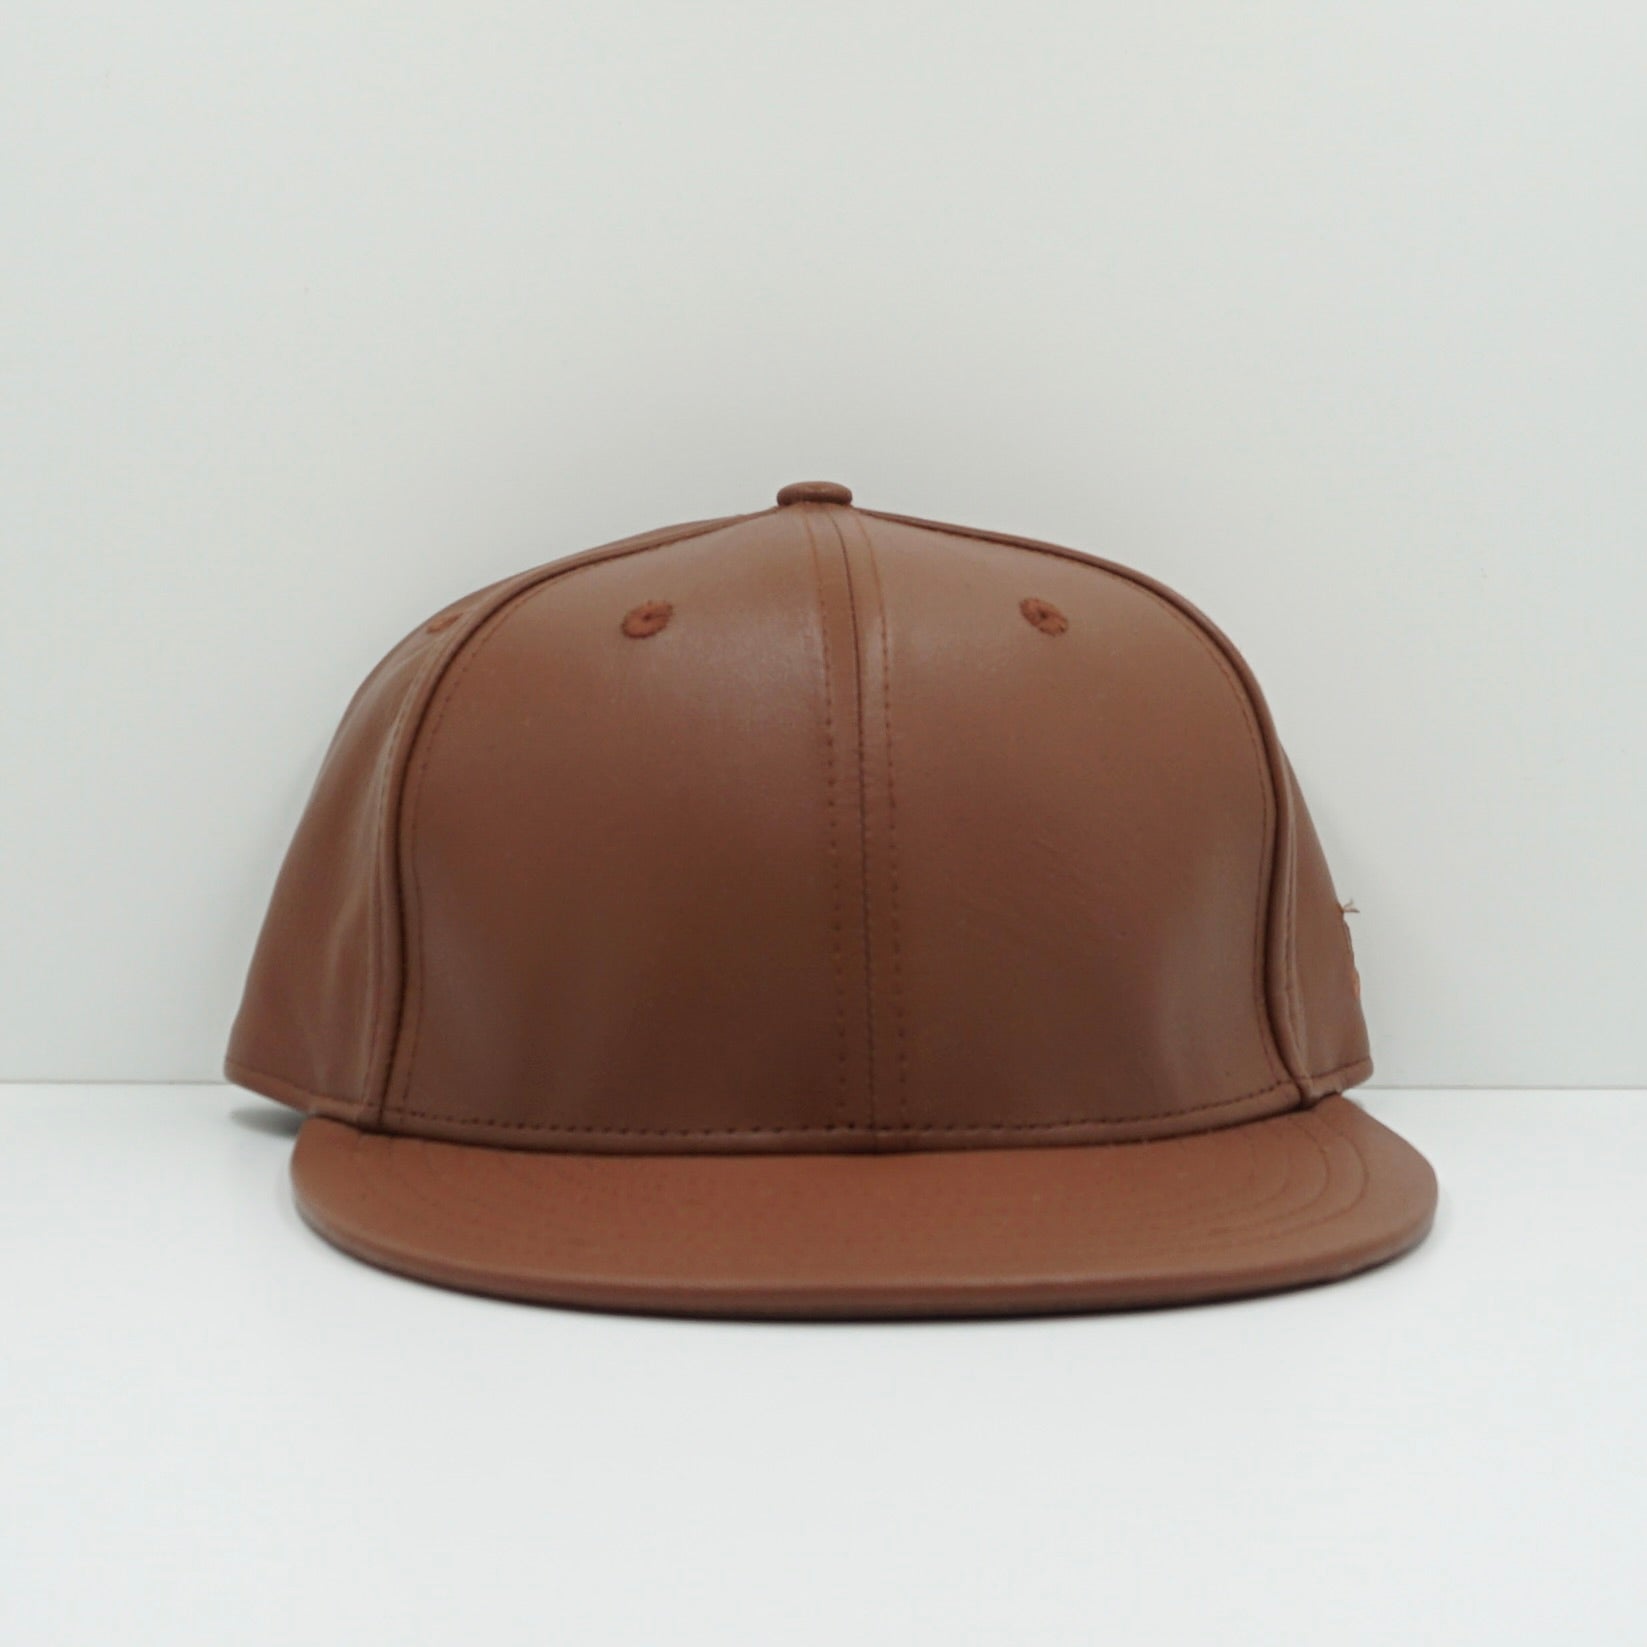 New Era Tan Leather Fitted Cap